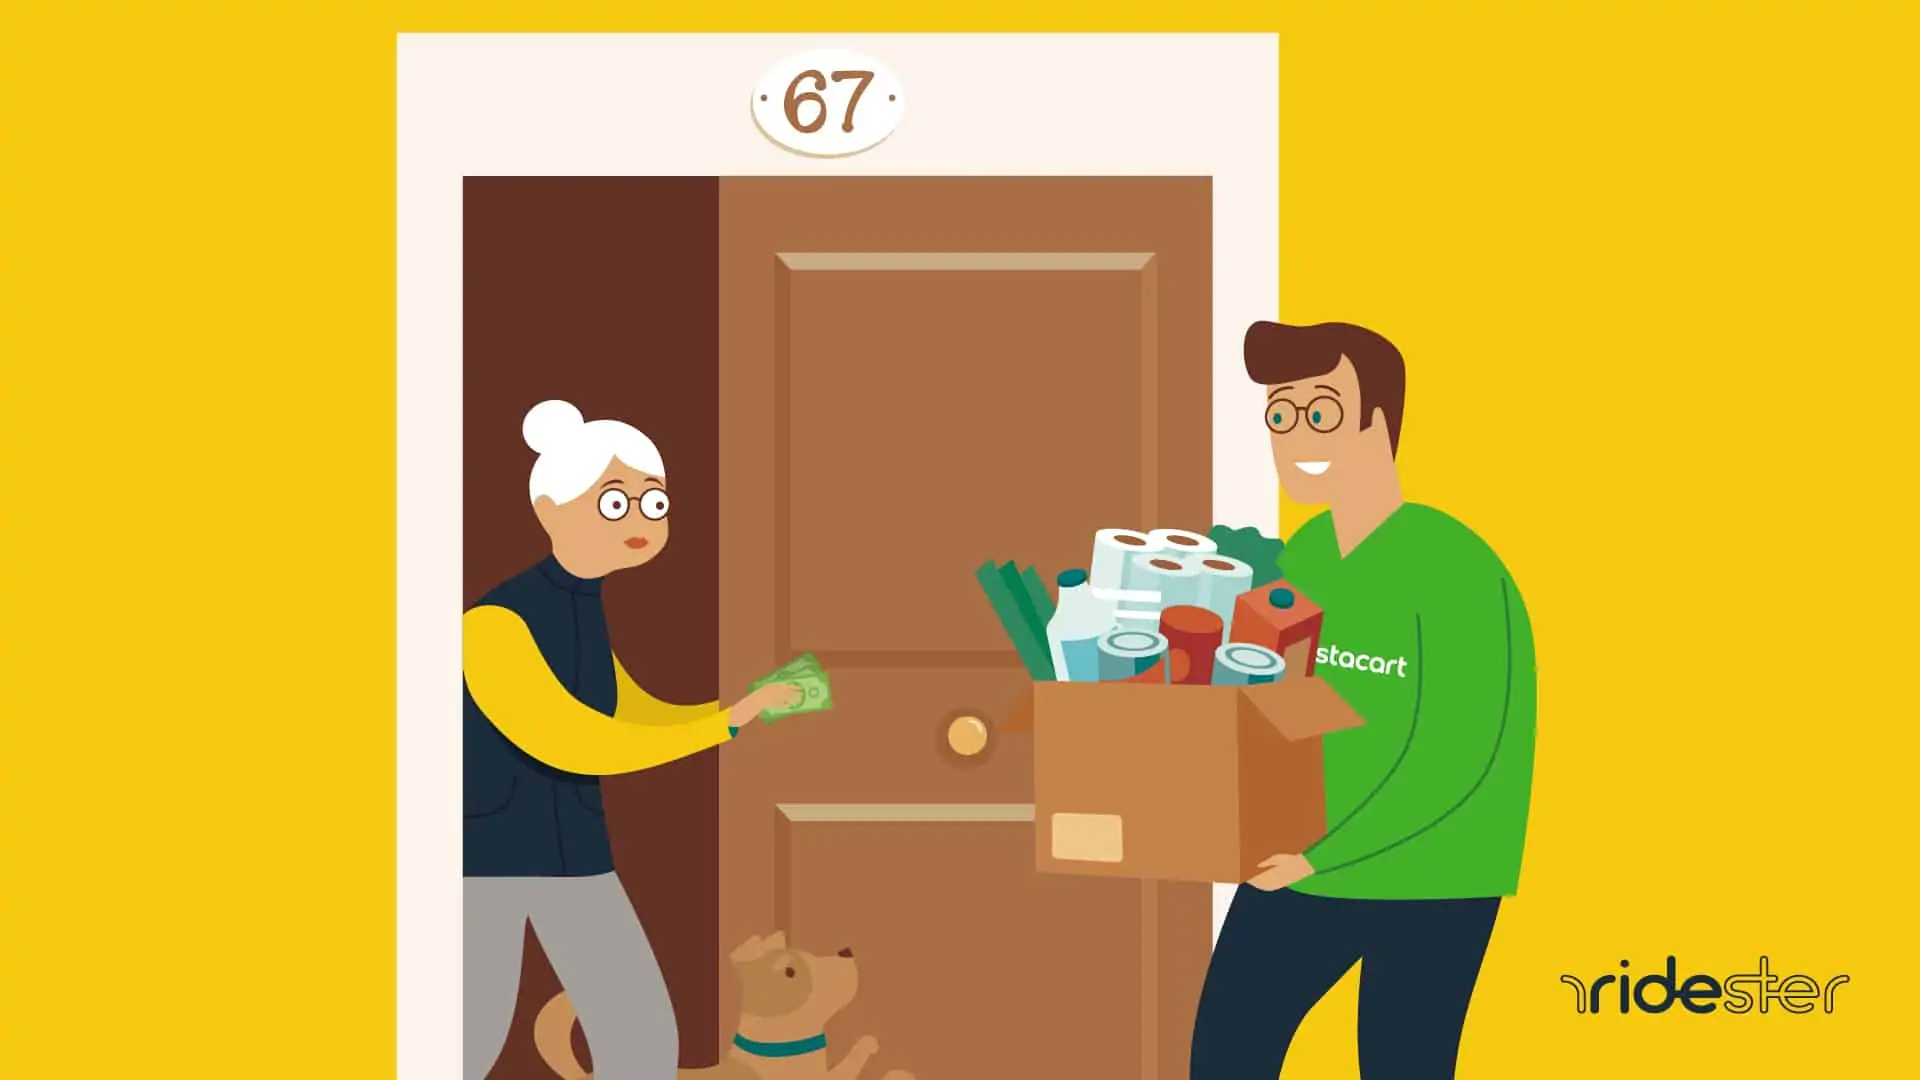 vector graphic showing instacart tipping - an instacart shopper delivering groceries to a woman standing inside a door and giving the driver cash for the order he is dropping off